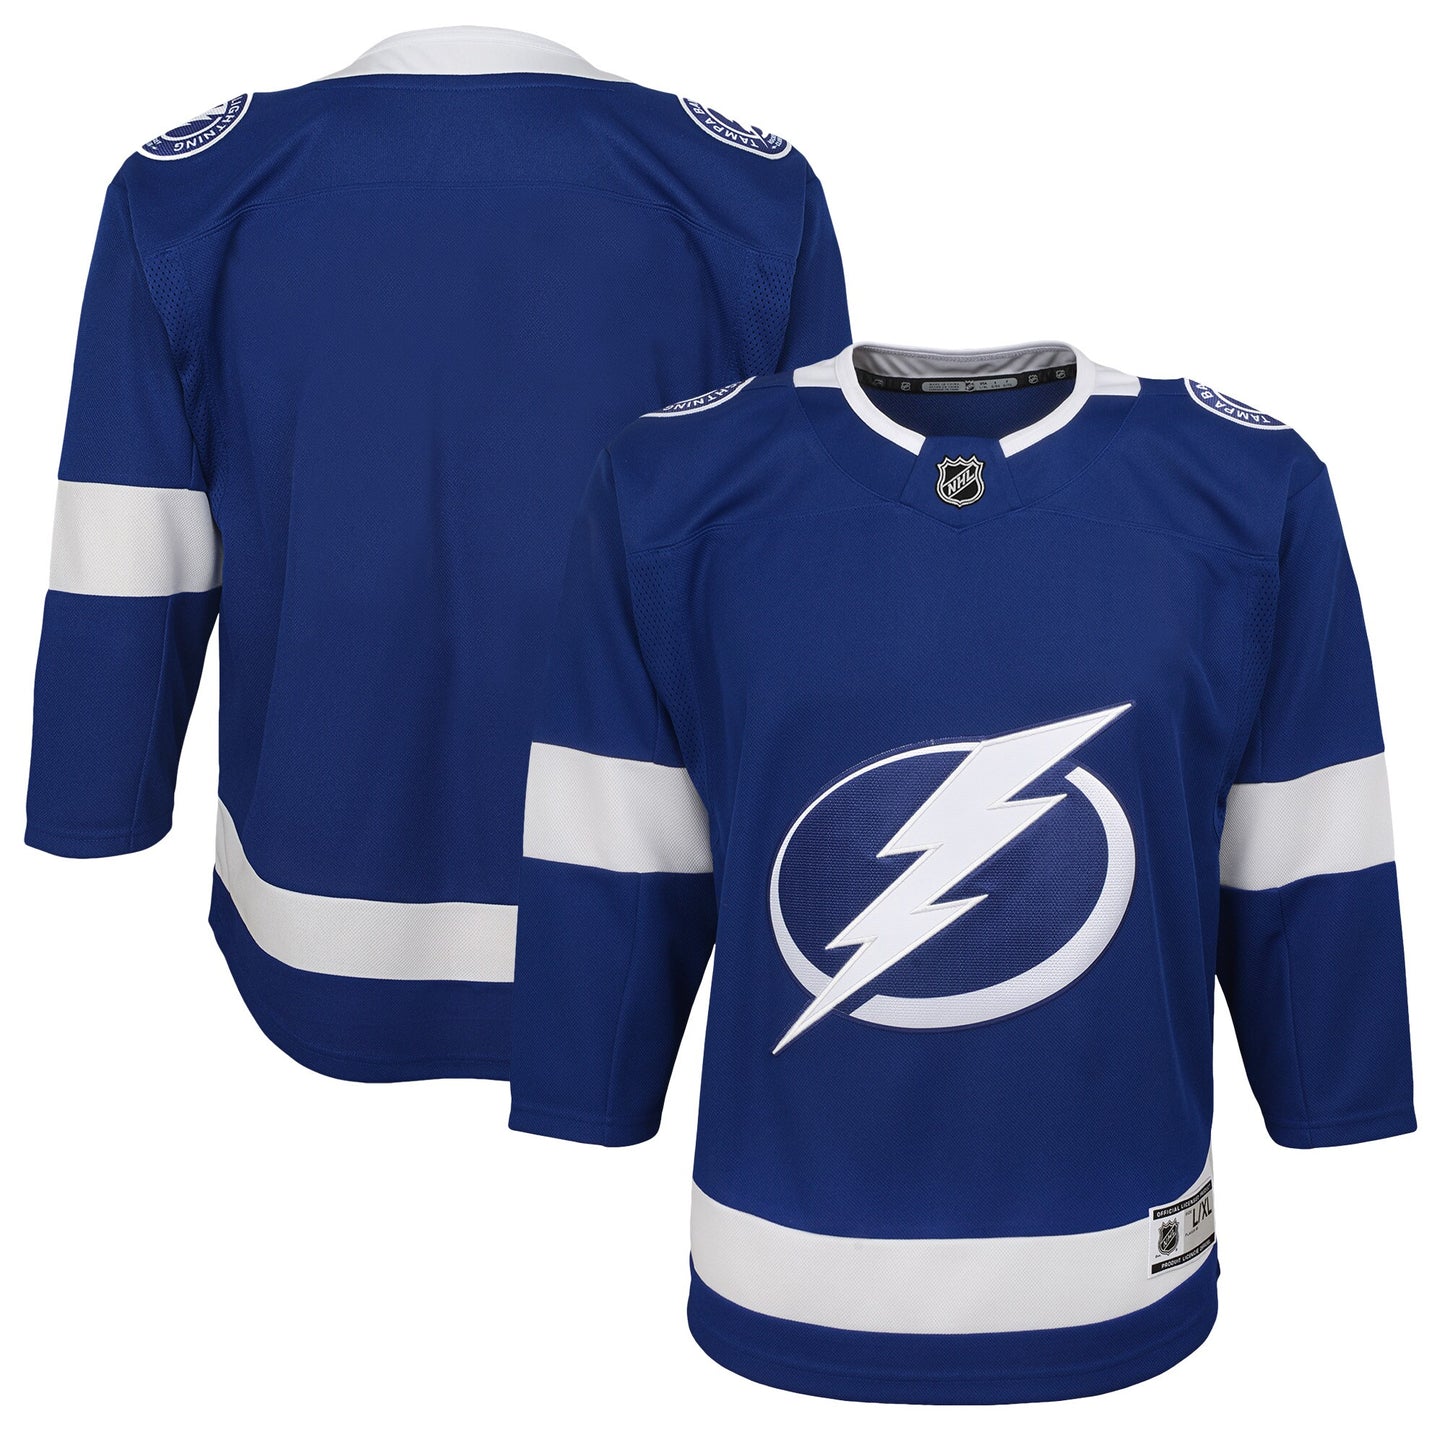 Tampa Bay Lightning Youth Home Blank Premier Jersey - Blue